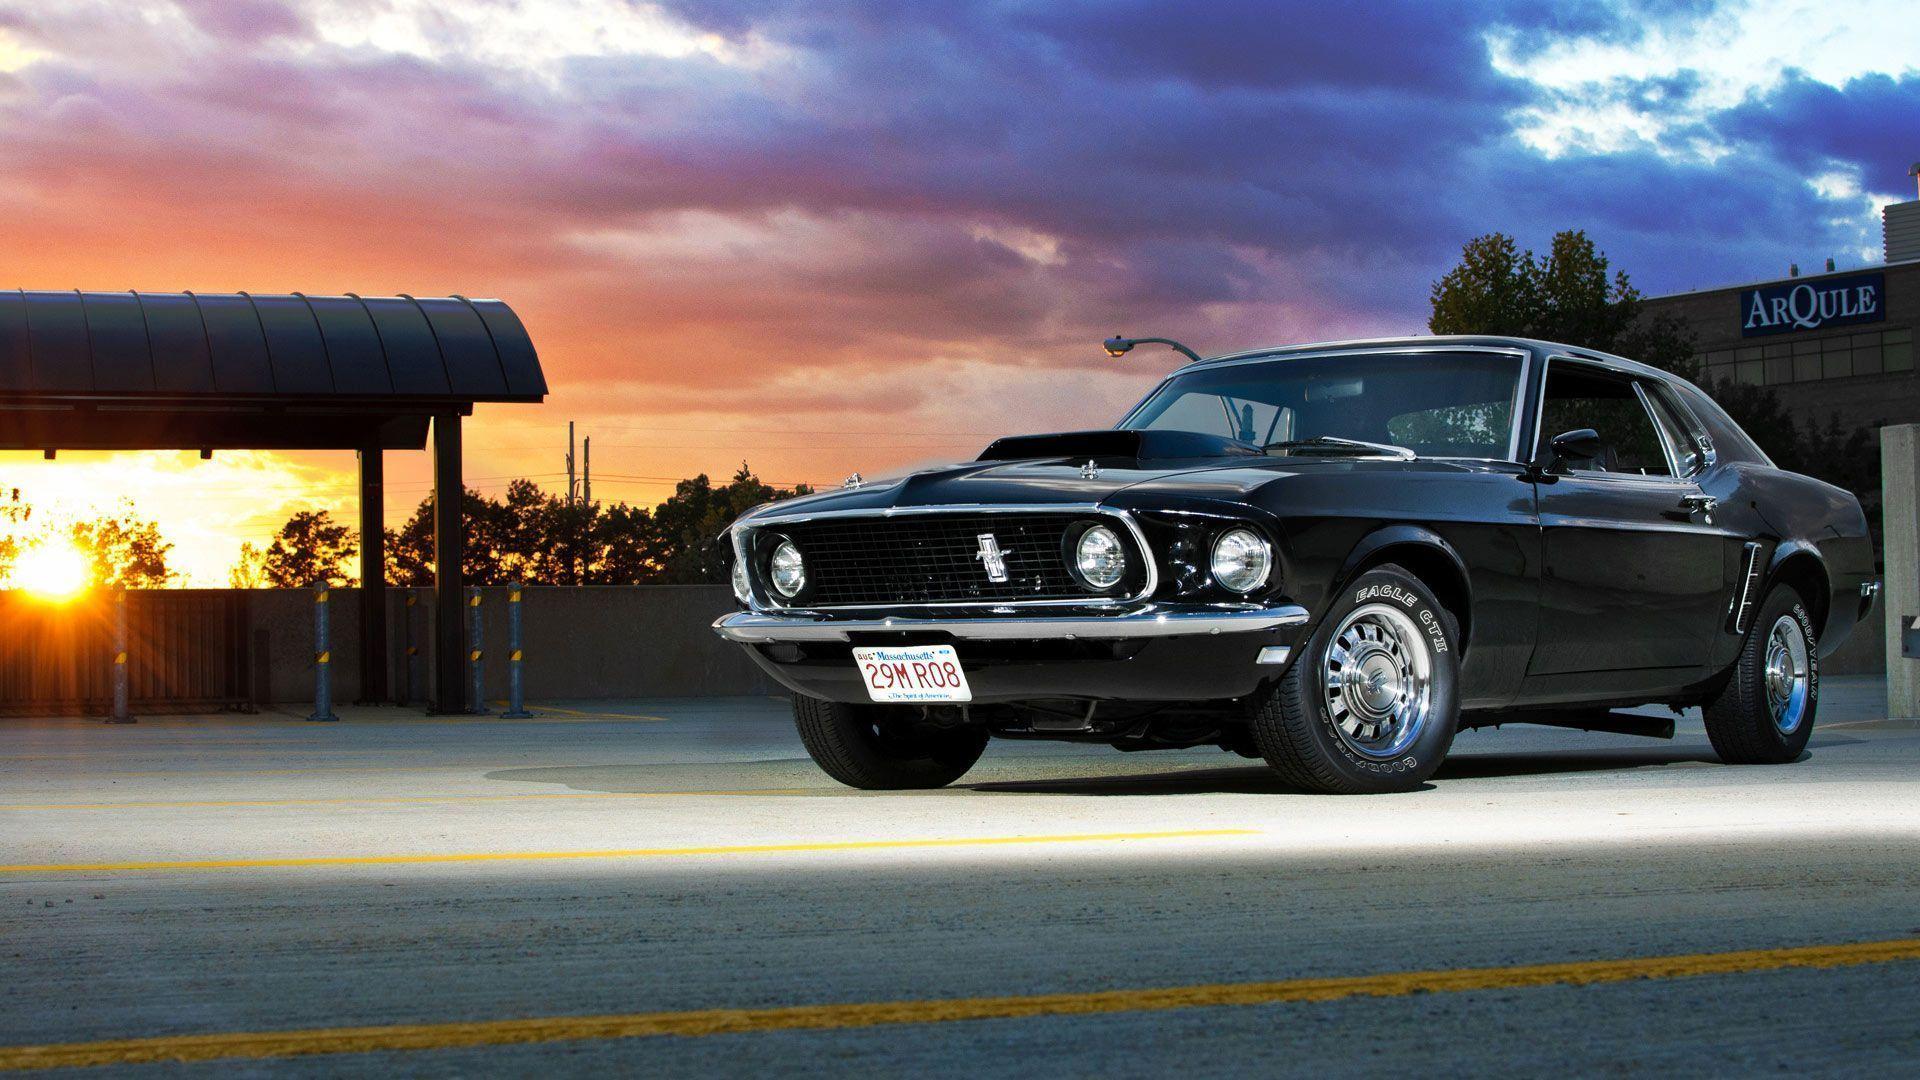 Ford Mustang Wallpaper. Ford Mustang Background